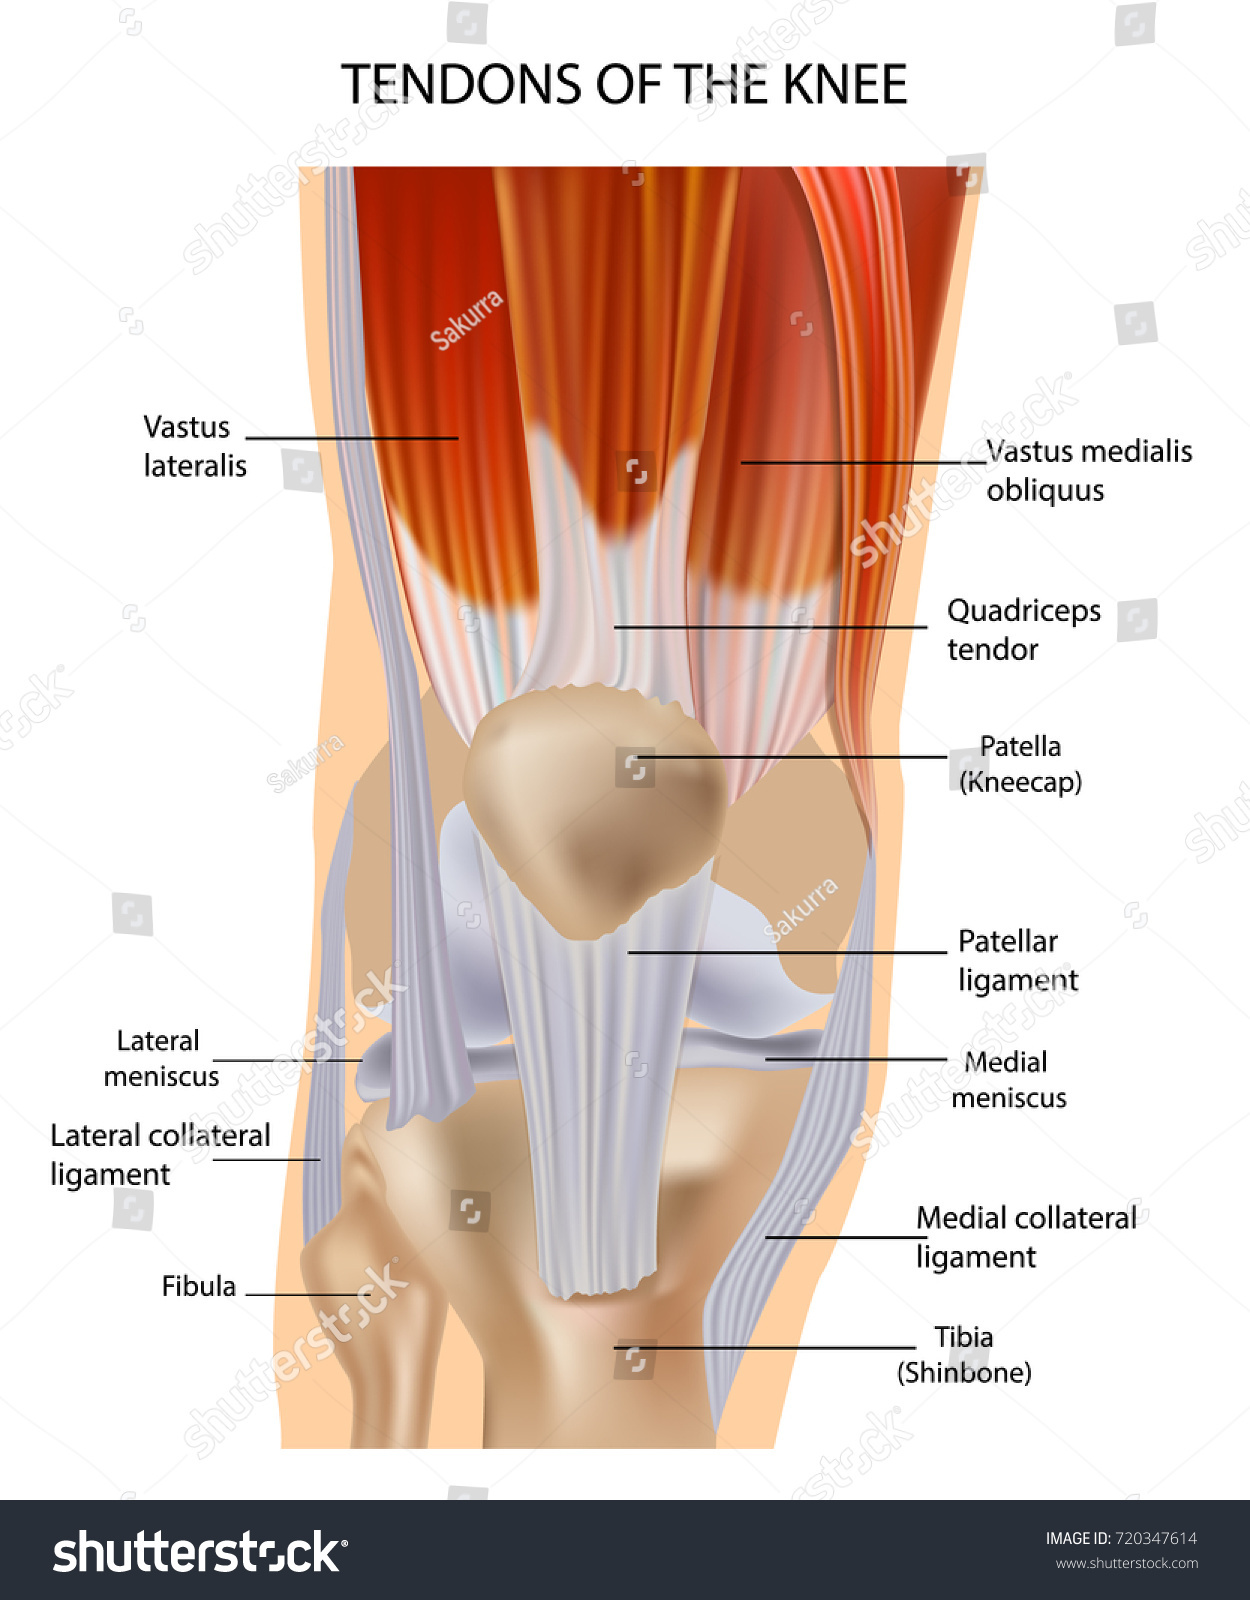 Knee Anatomy Muscles Tendons Muscle Structure Stock Vector Royalty Free 720347614